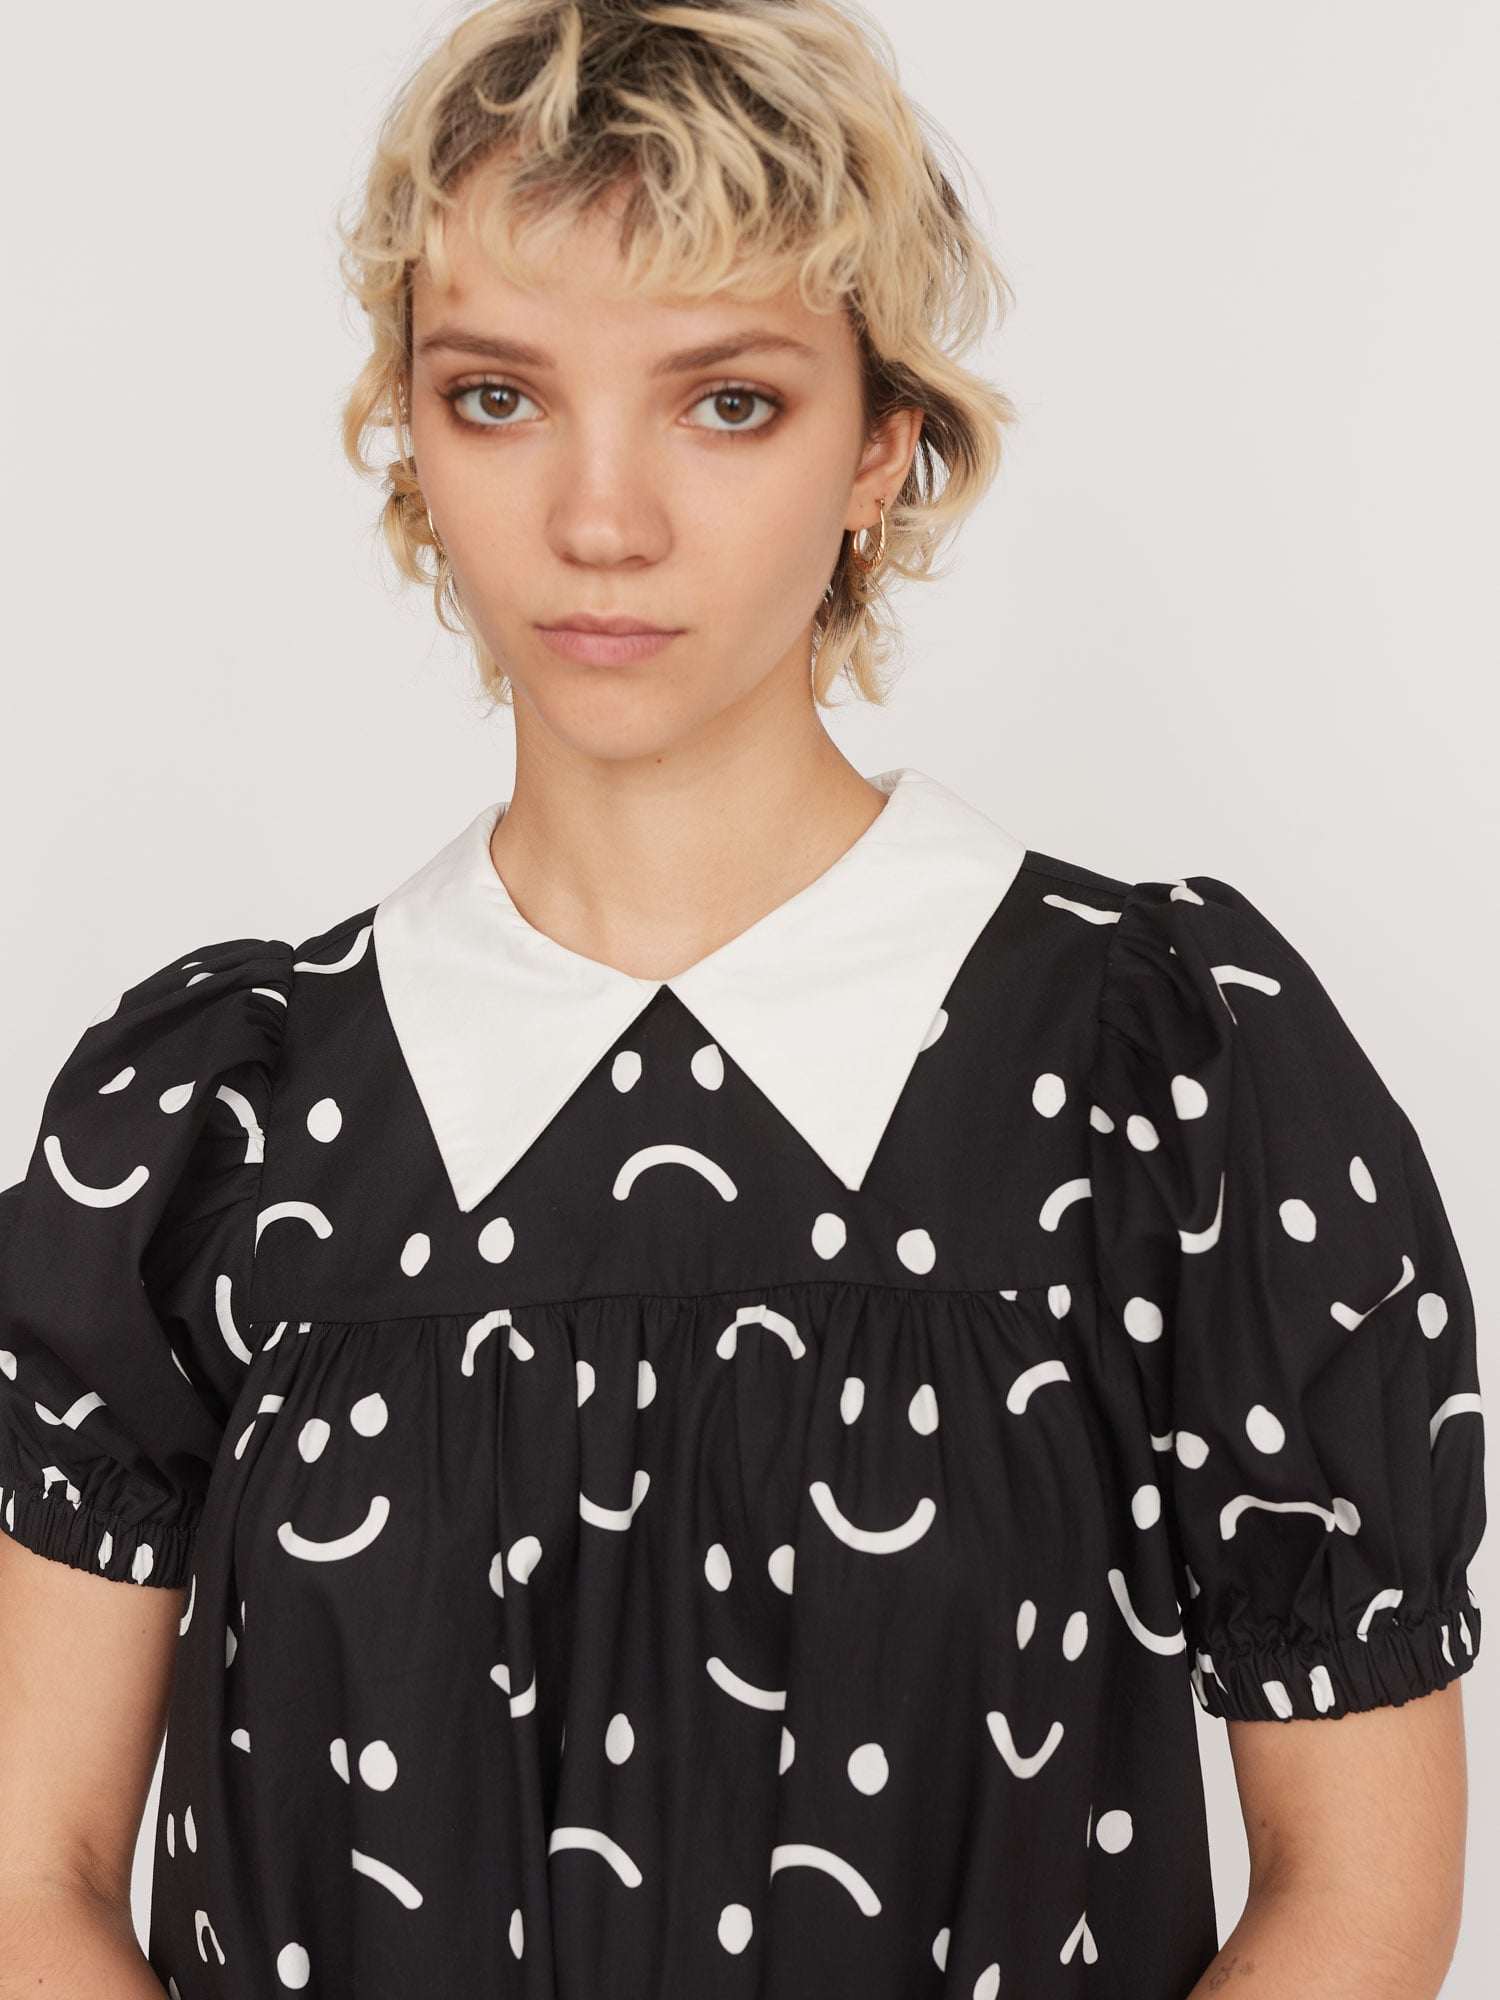 Independent Fashion And Streetwear For Women I All Our Clothing | Lazy Oaf